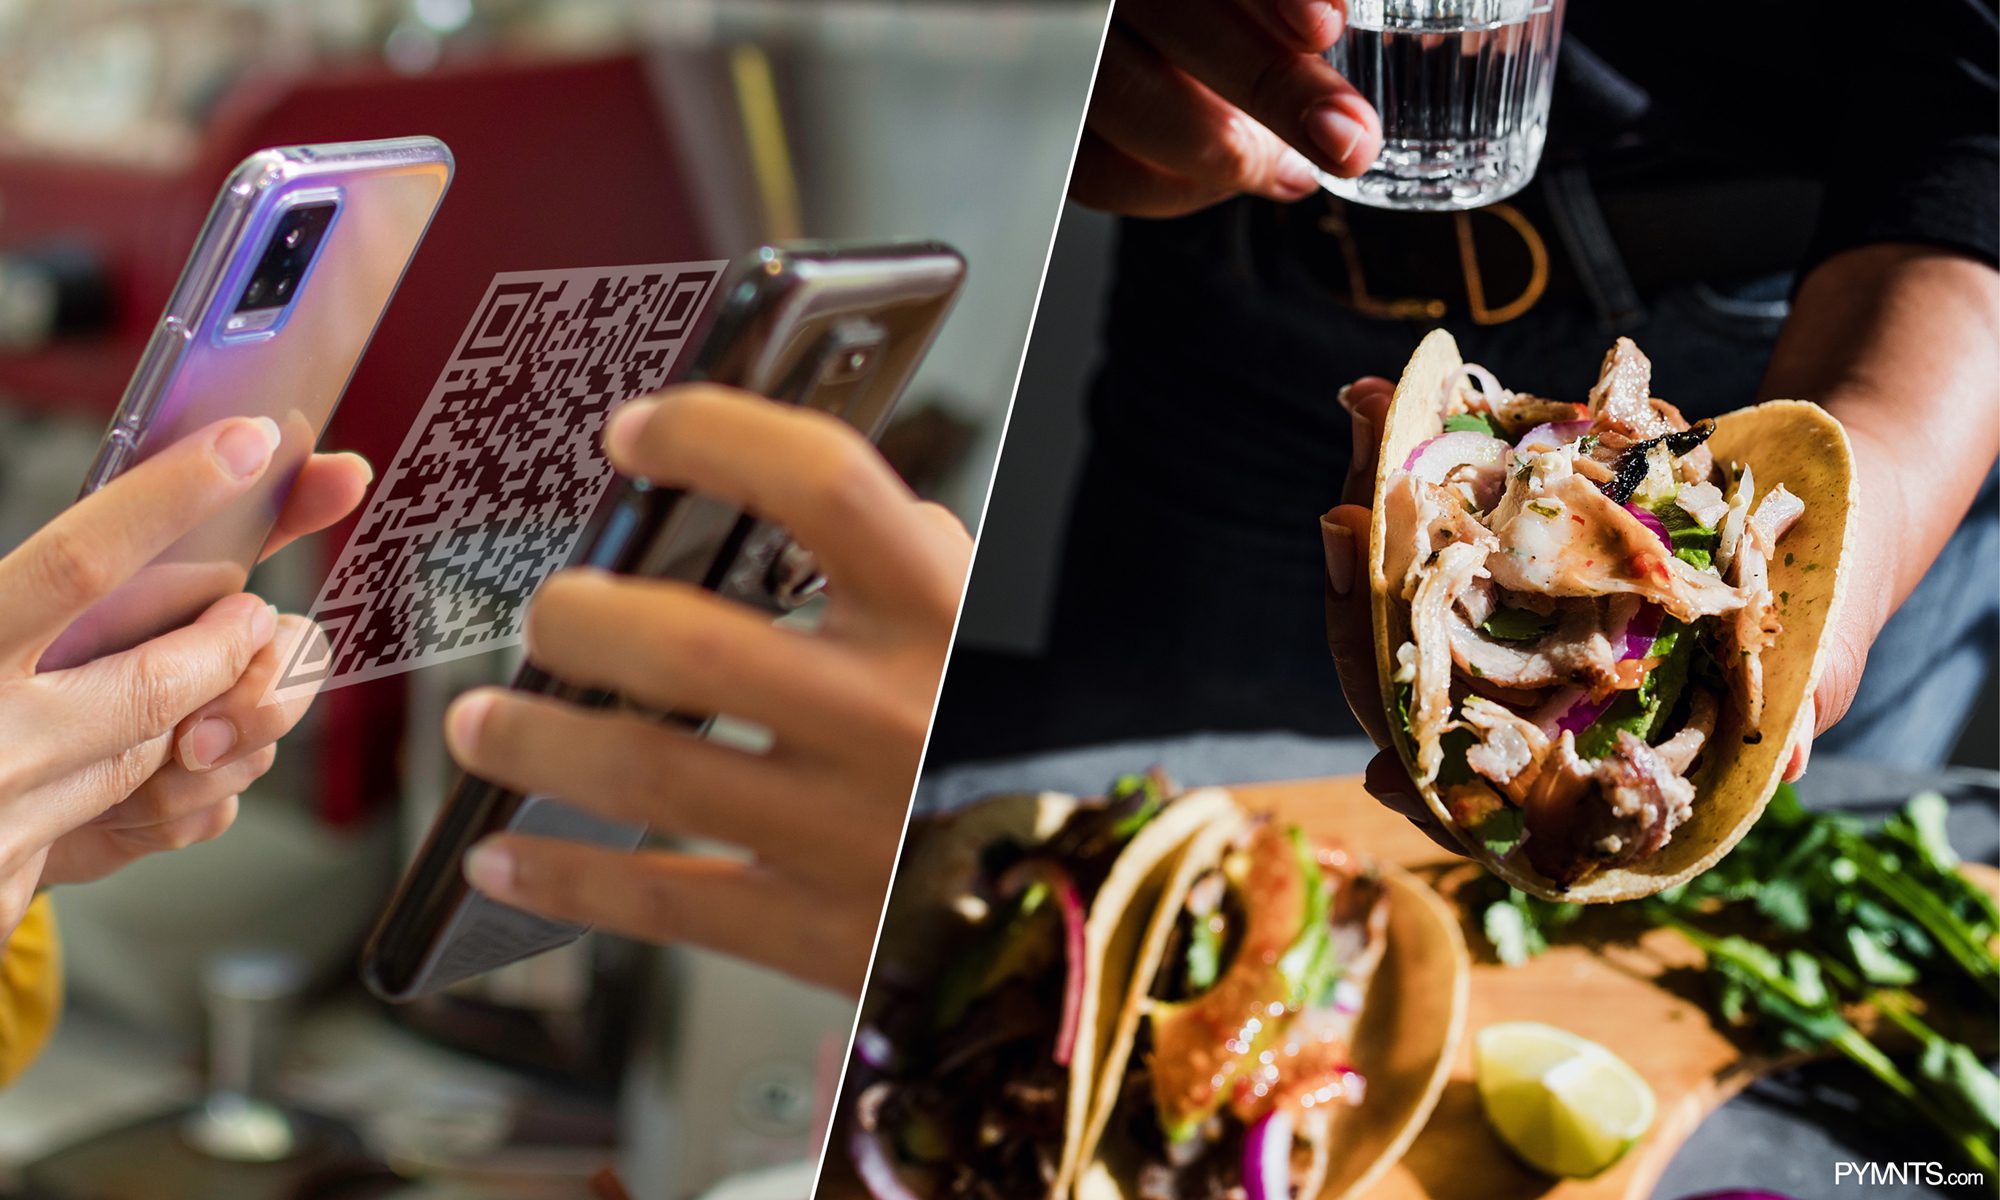 Restaurants Appoint Digital Leaders to Win Diner Loyalty